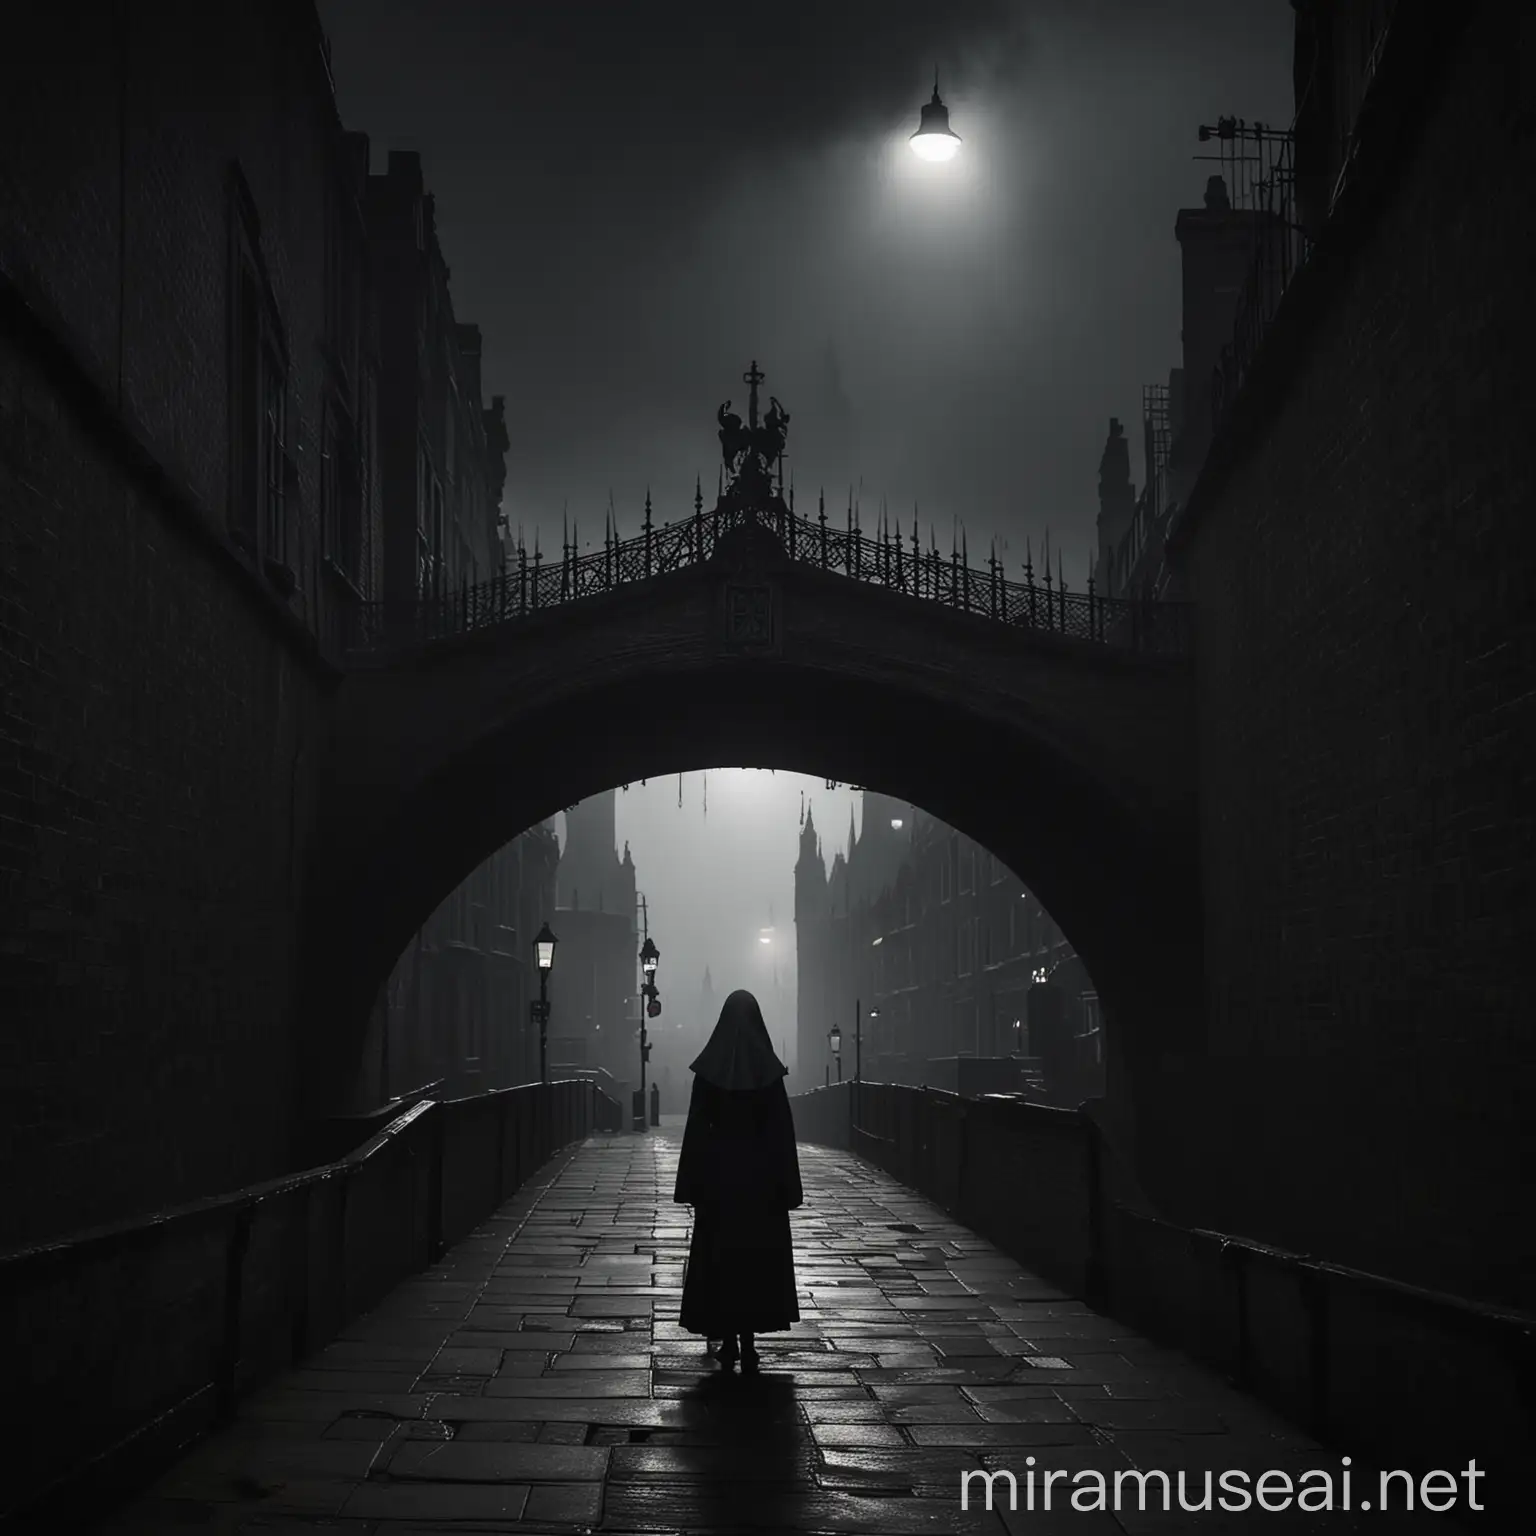 The silhouette of London Bridge in a dark and mysterious atmosphere, with a detail symbolizing the nun's spiked head.
